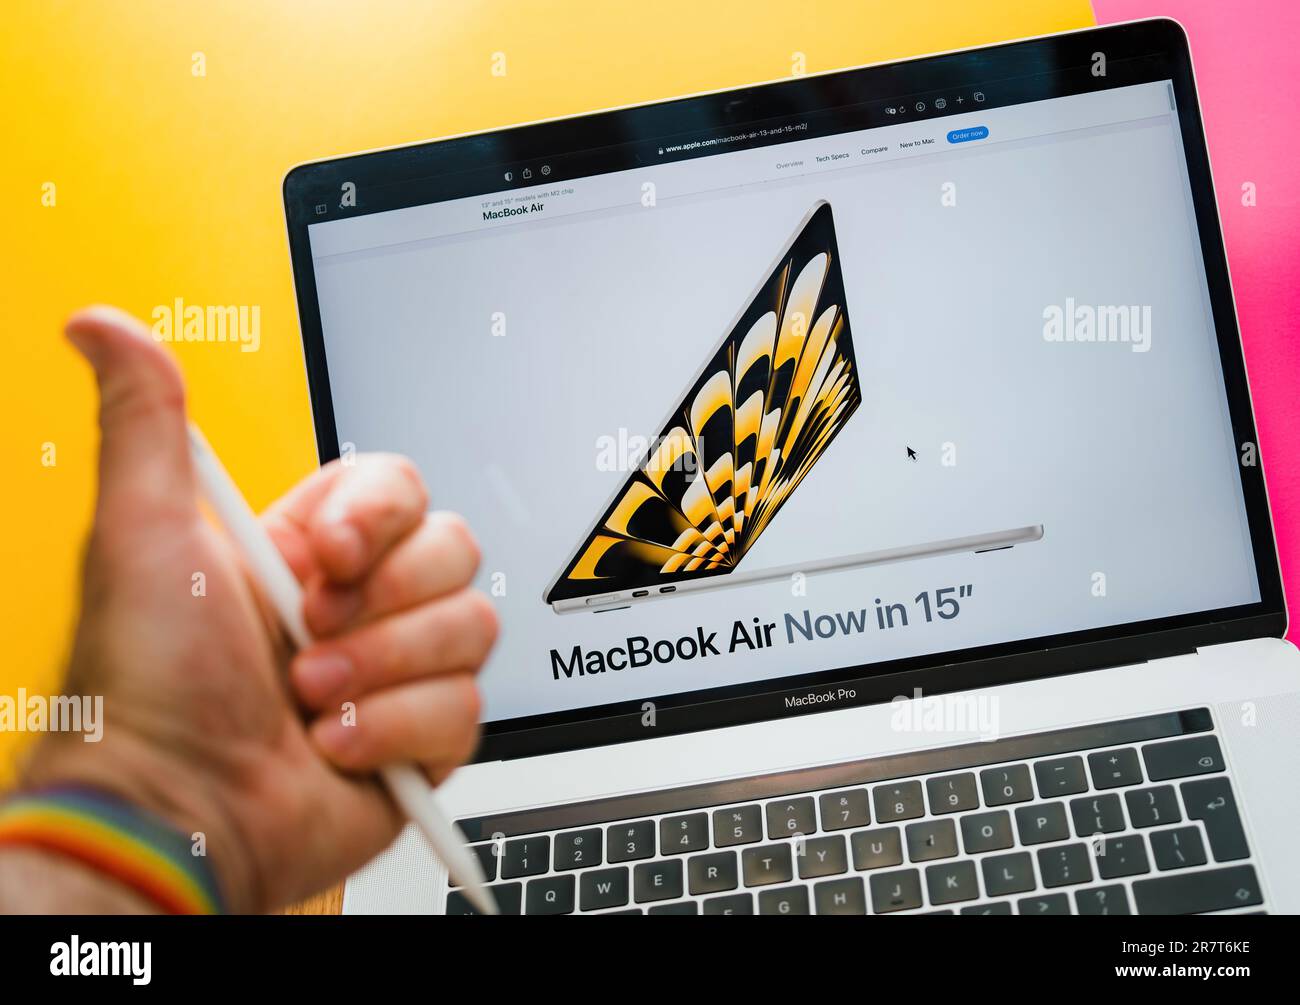 Paris, France - Jun 6, 2023: MacBook Air now in 15 inch - Creative room table with webpage of Apple on laptop showcasing latest device in new size - t Stock Photo